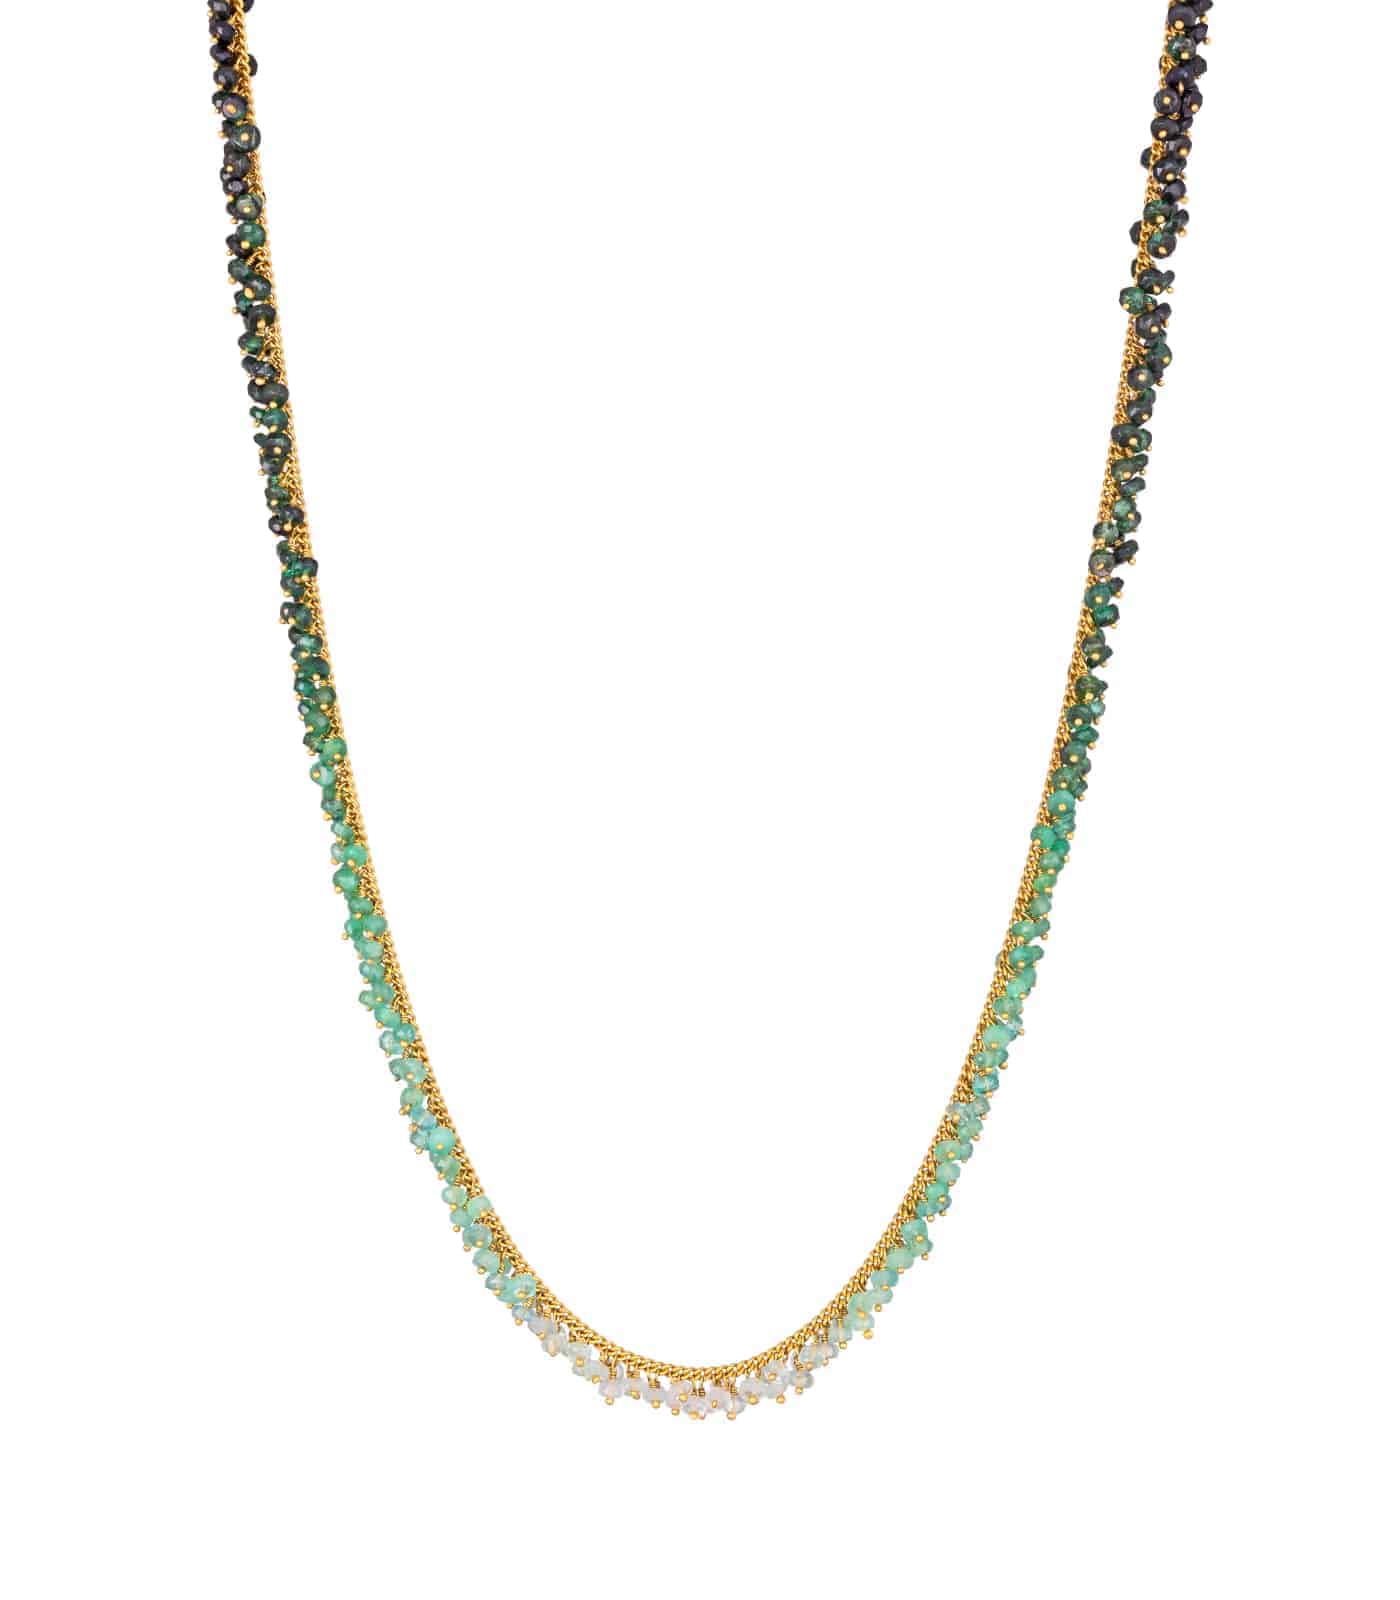 Photo of emerald beaded necklace with ombre effect on white background